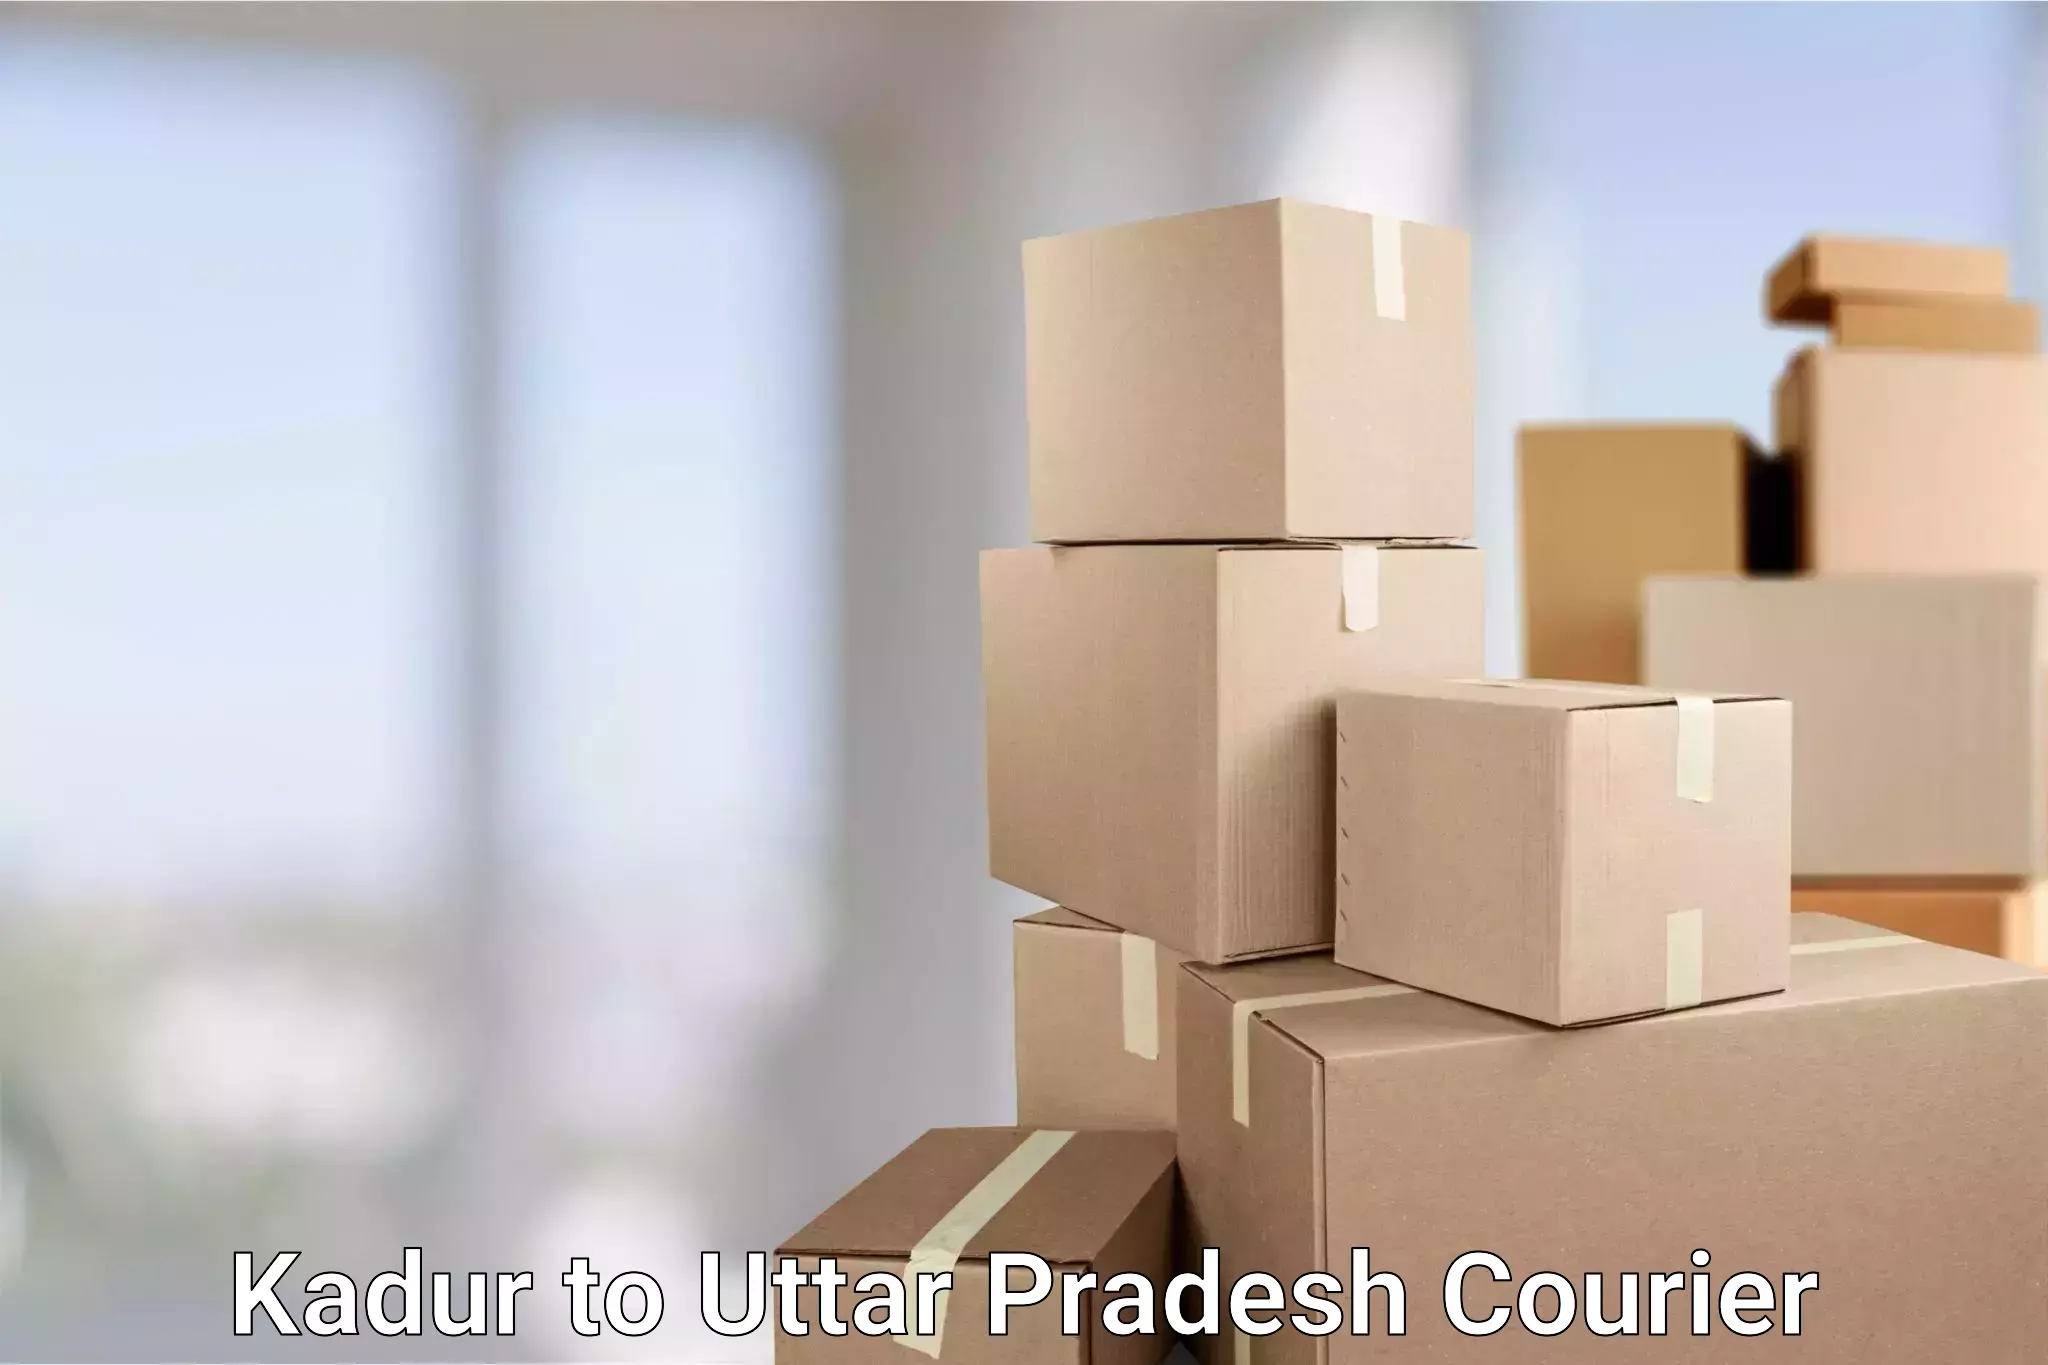 Flexible delivery schedules in Kadur to Ayodhya